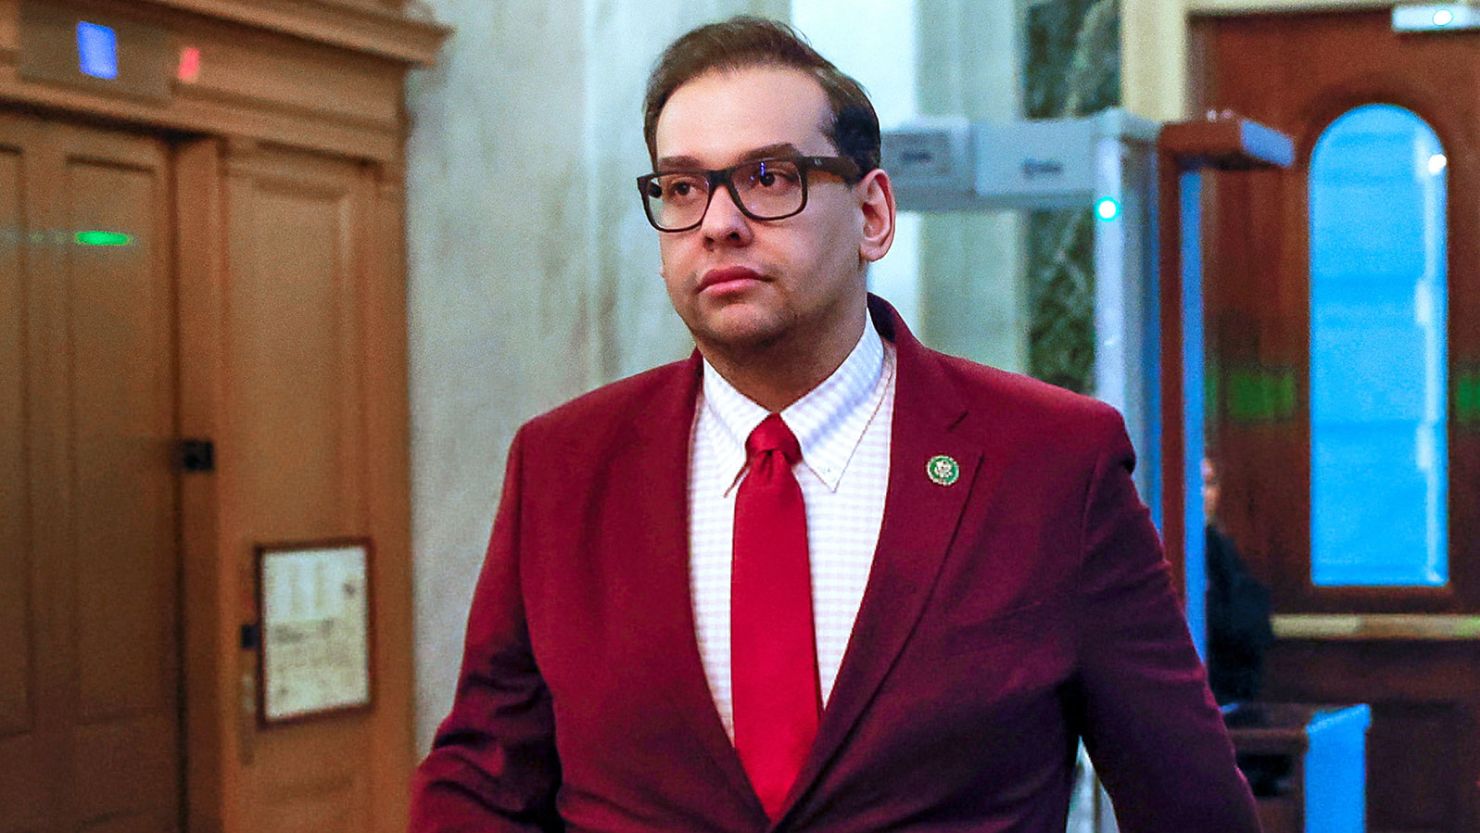 U.S. Rep. George Santos heads to the floor of the House of Representatives for a vote on a Republican motion to refer a Democratic-sponsored resolution to expel Santos from the House to the House Ethics Committee instead of an immediate explusion vote, on Capitol Hill in Washington.